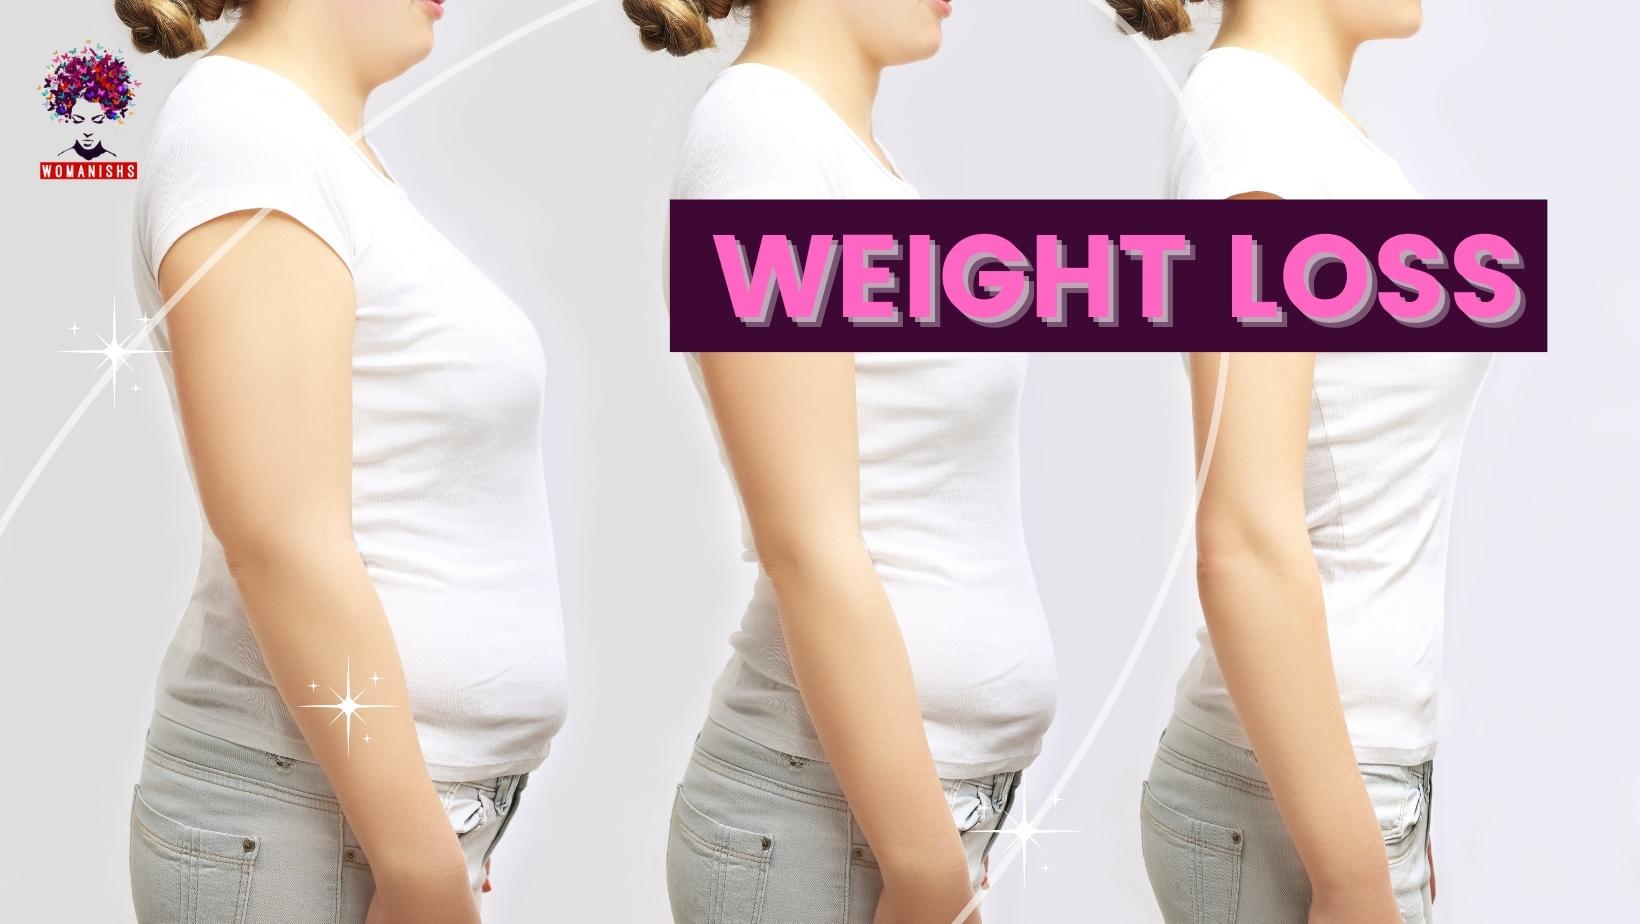 How much weight can you lose in a week